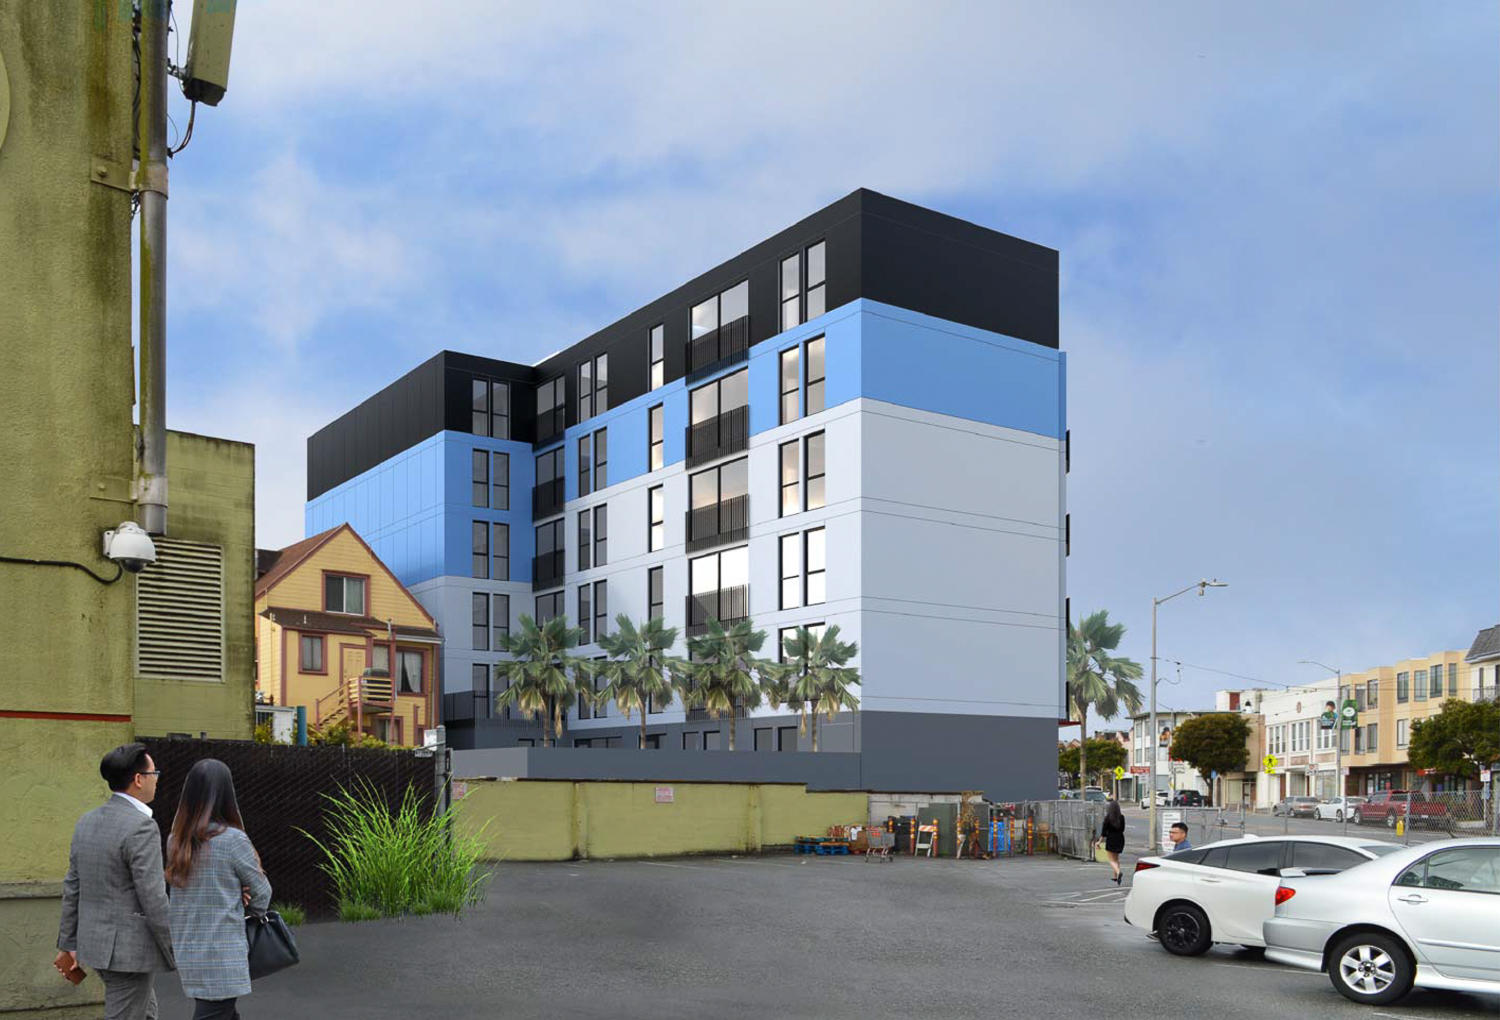 4199 Mission Street as seen from the local grocery store parking lot, rendering by Gary Gee Architects